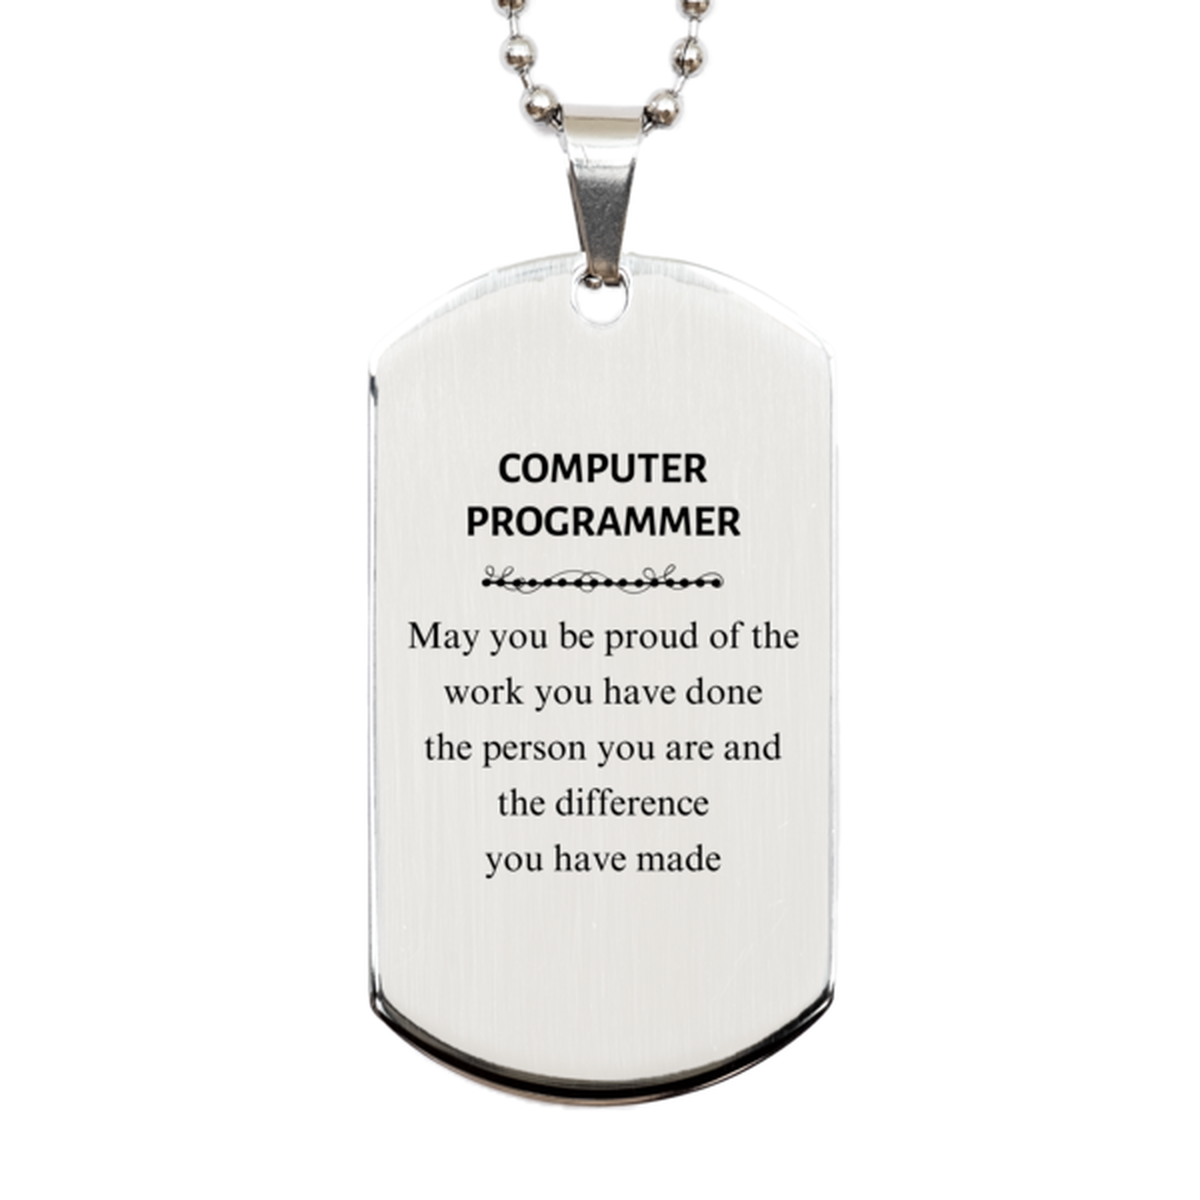 Computer Programmer May you be proud of the work you have done, Retirement Computer Programmer Silver Dog Tag for Colleague Appreciation Gifts Amazing for Computer Programmer